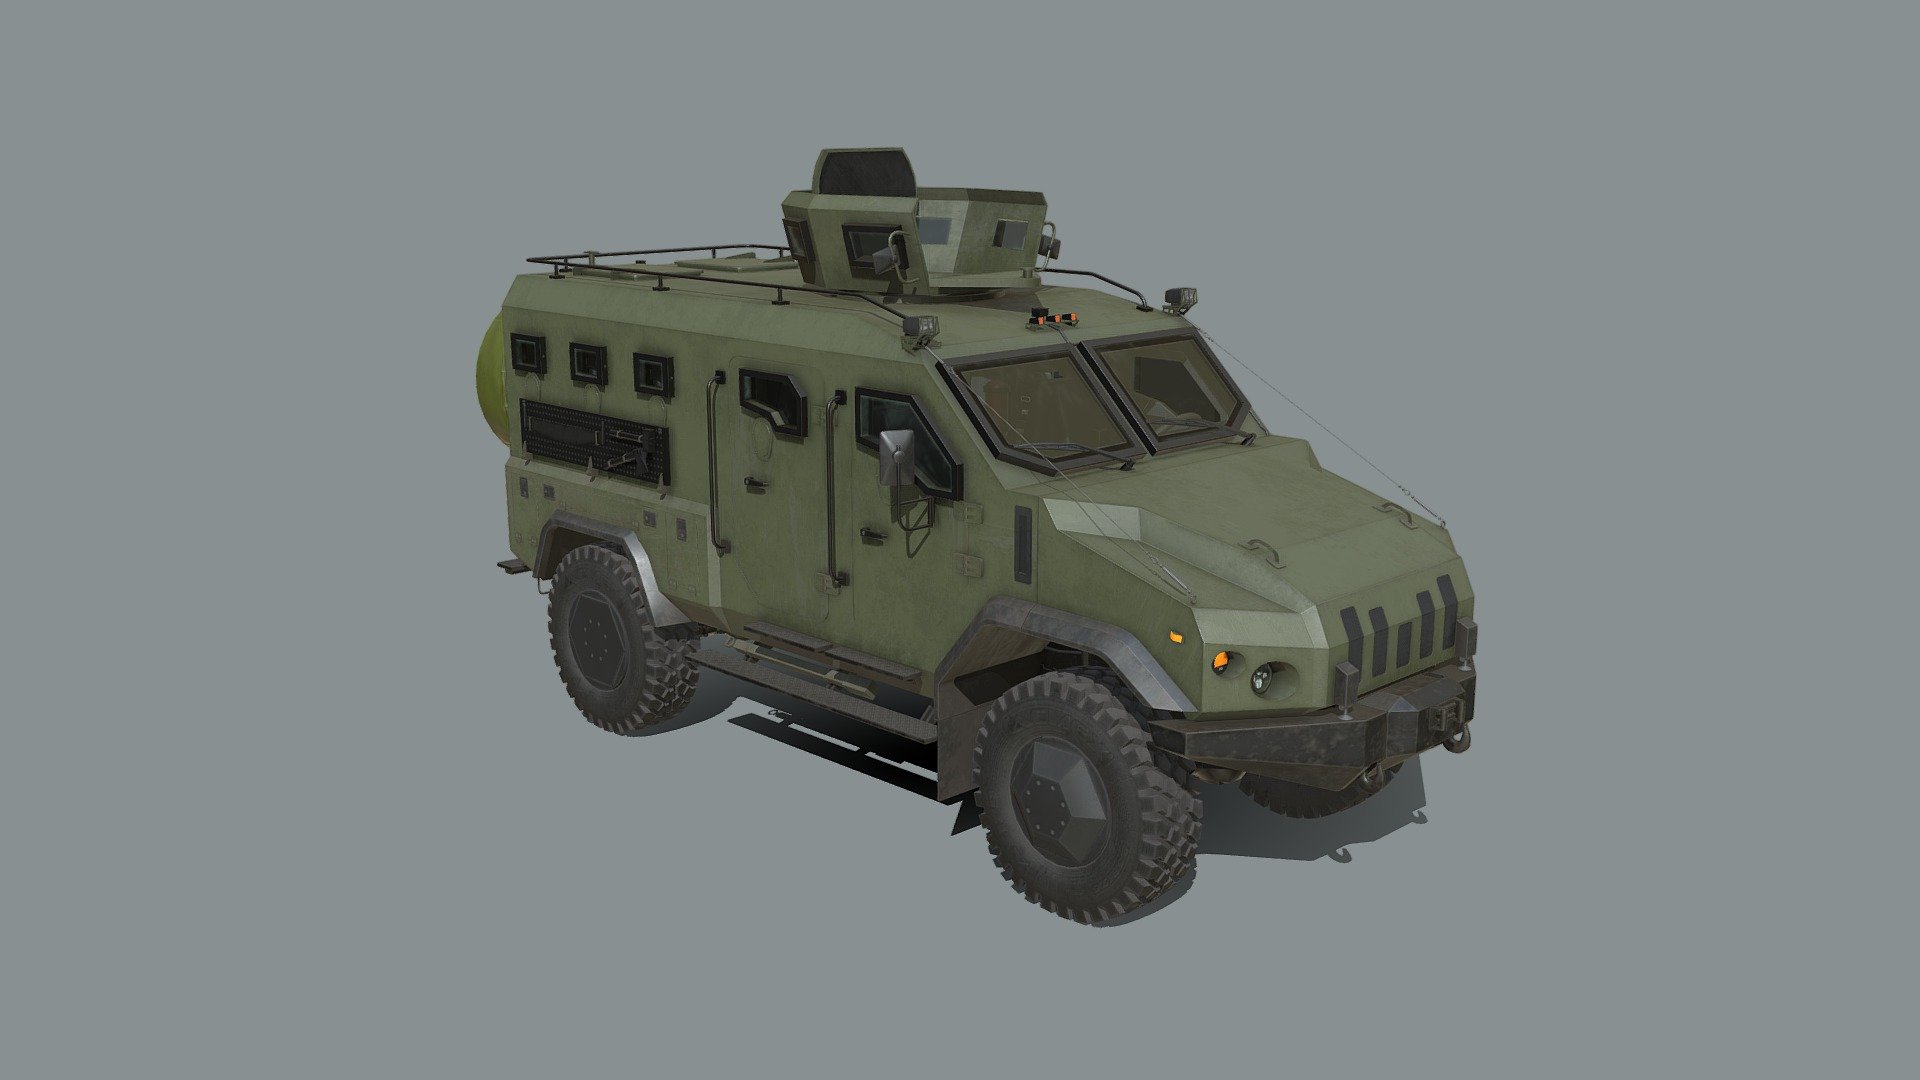 VARTA – is an ukraine Armored Personnel Carrier (APC). The vehicle compartment is made from specialized 560 steel grade which protects crew from armored piercing incendiary ammo up to 7.62mm. VARTA uses a V-shape hull structure to accommodate anti-mine seats, giving crew members protection to withstand detonation of charges up to 6kg of TNT. VARTA includes a fighting module equipped with either the 7.62 mm or the 12.7 mm machine gun. The vehicle has 10 gun ports around the vehicle with the feasibility of accommodating a UBGL (Under-Barrel Grenade Launcher) 3d model